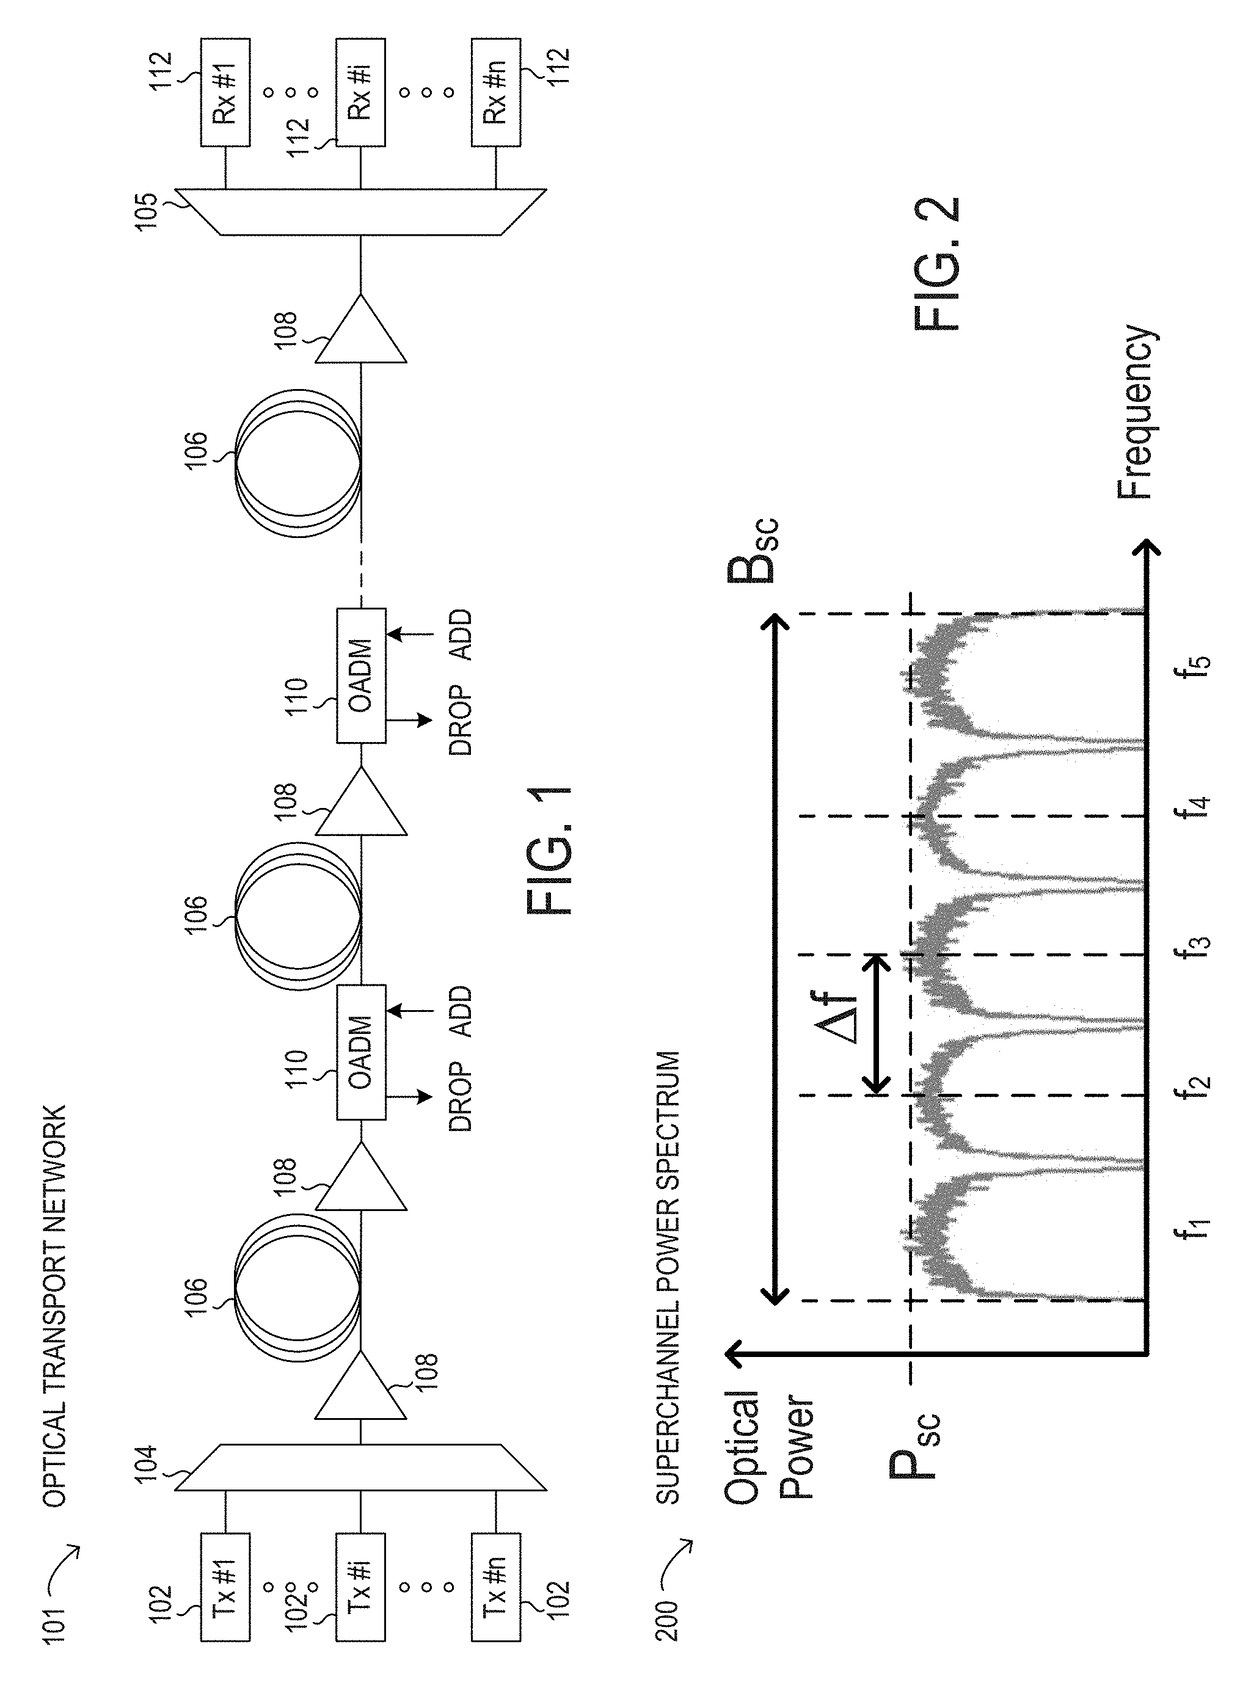 Optical transport network with improved signal loading